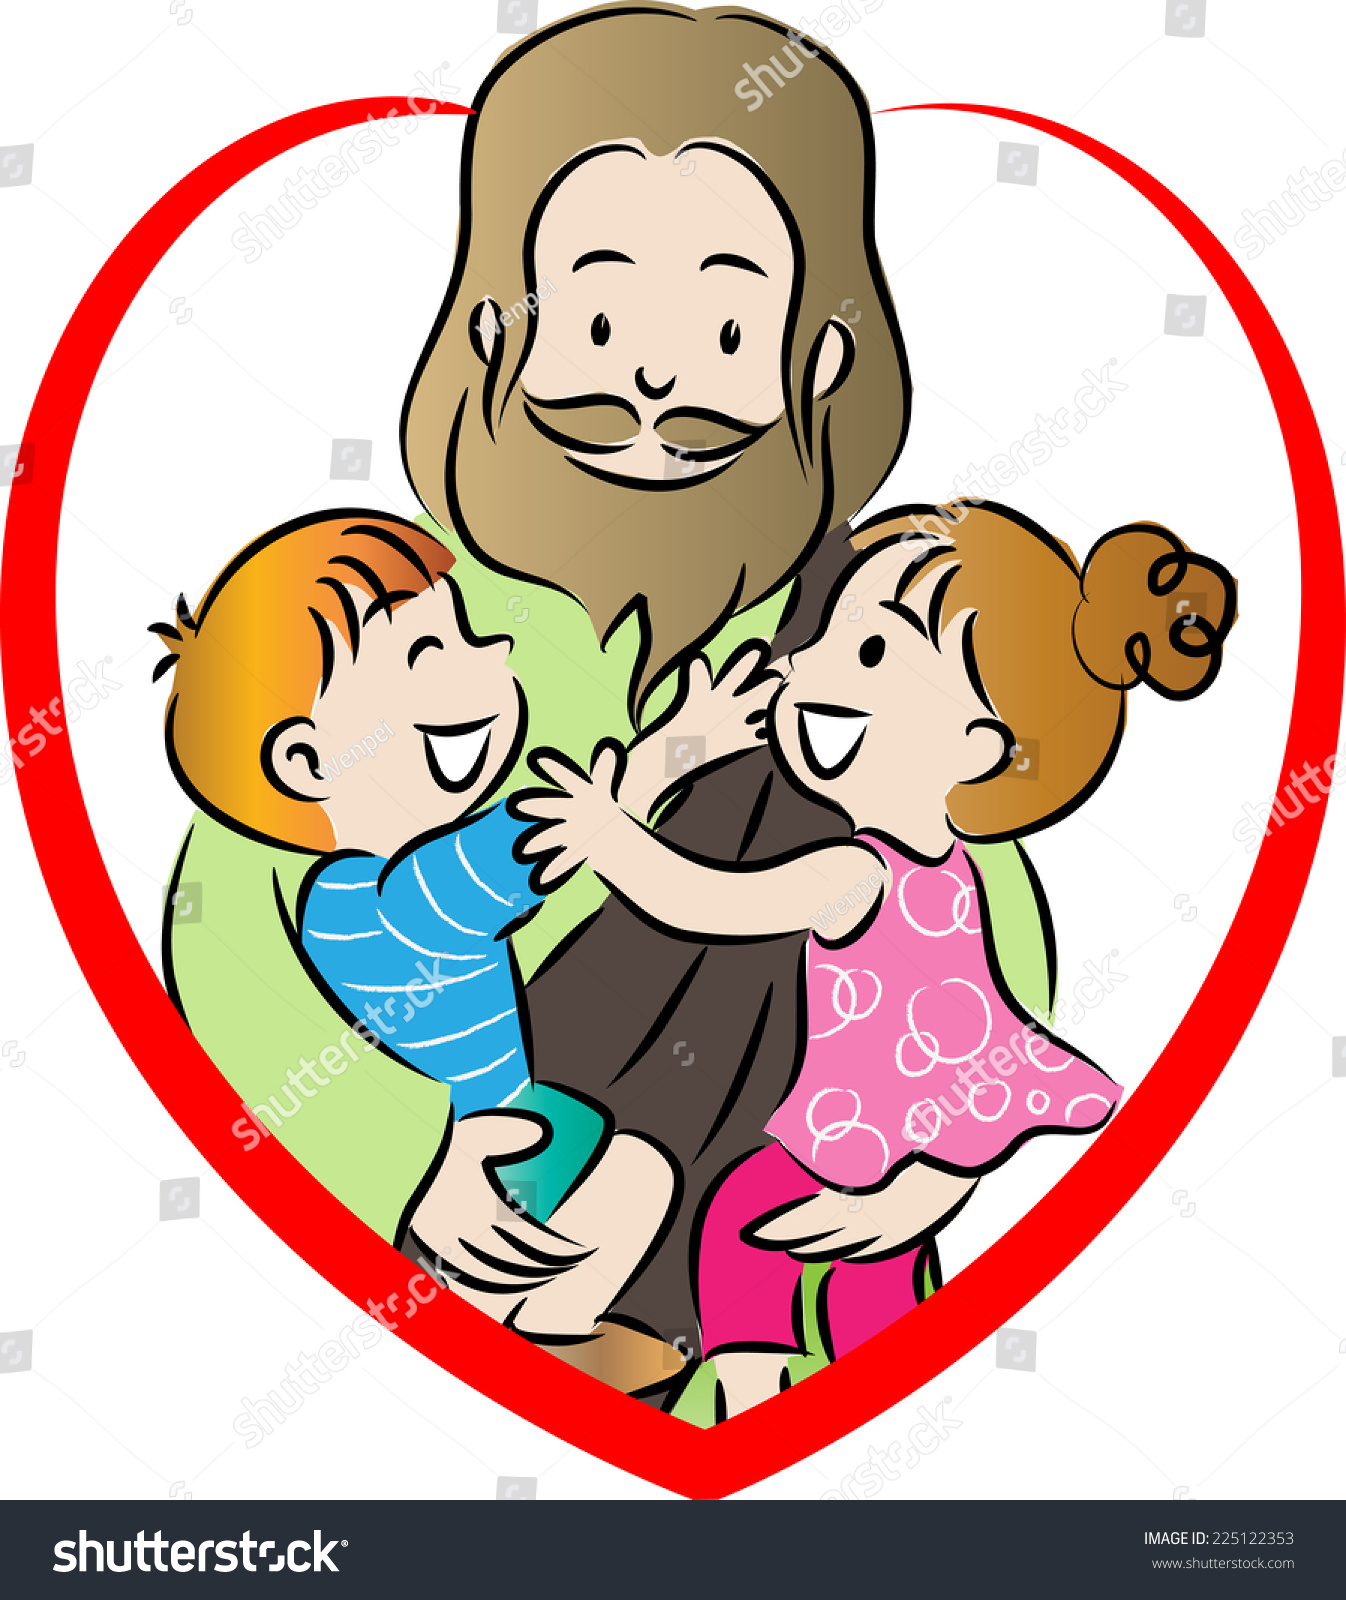 clipart jesus and child - photo #22